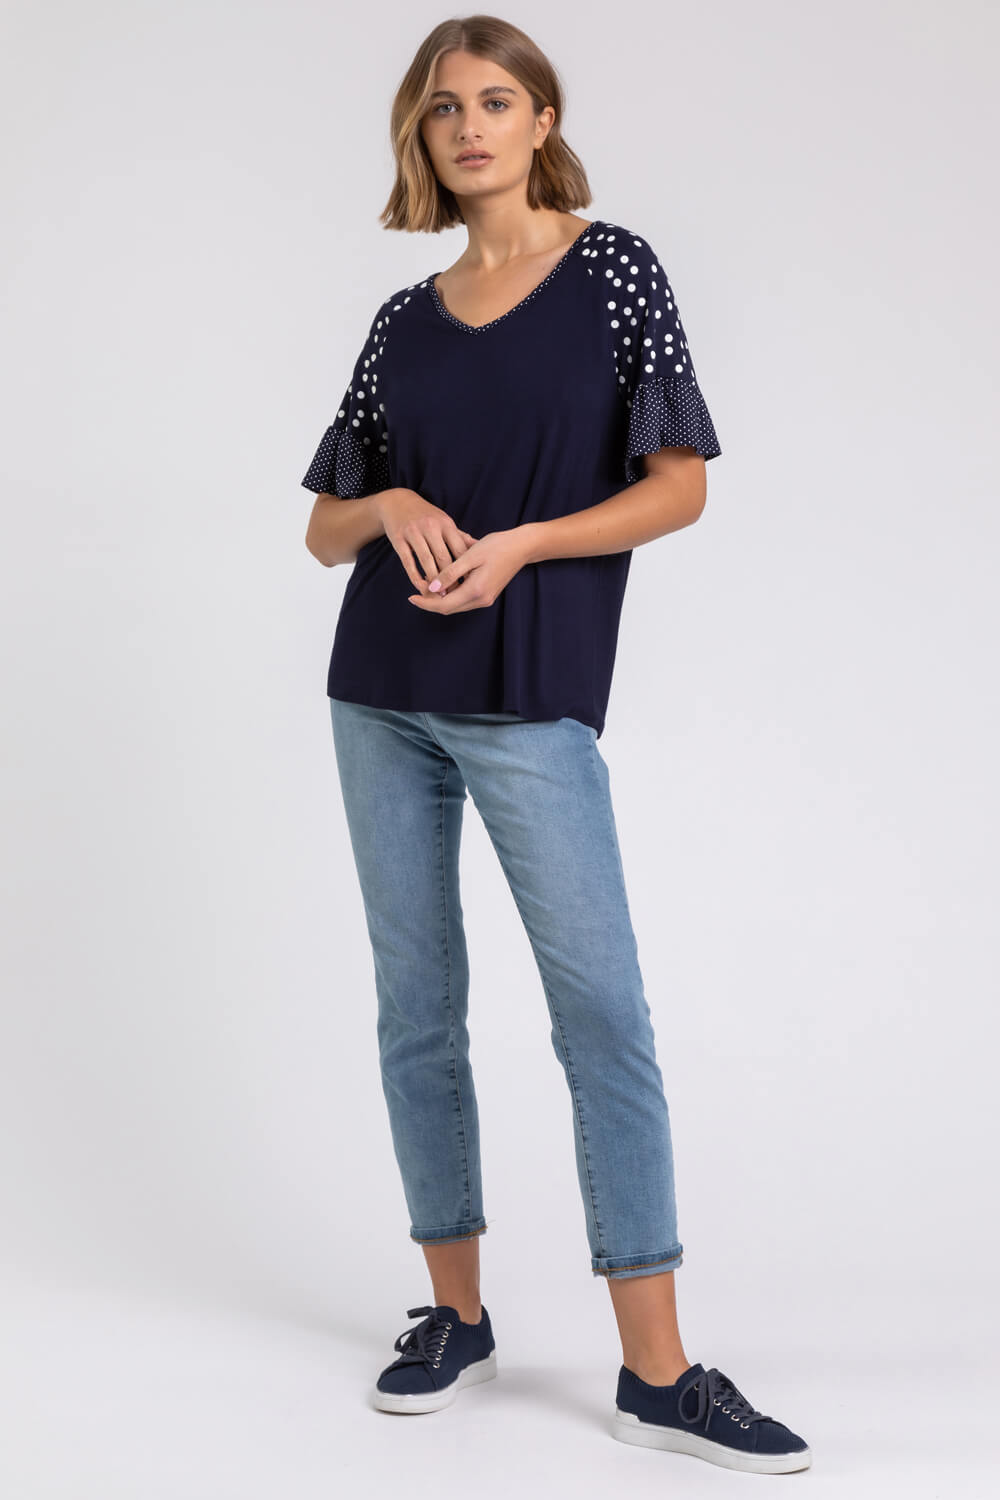 Navy  Spot Print Frill Sleeve Top, Image 3 of 5